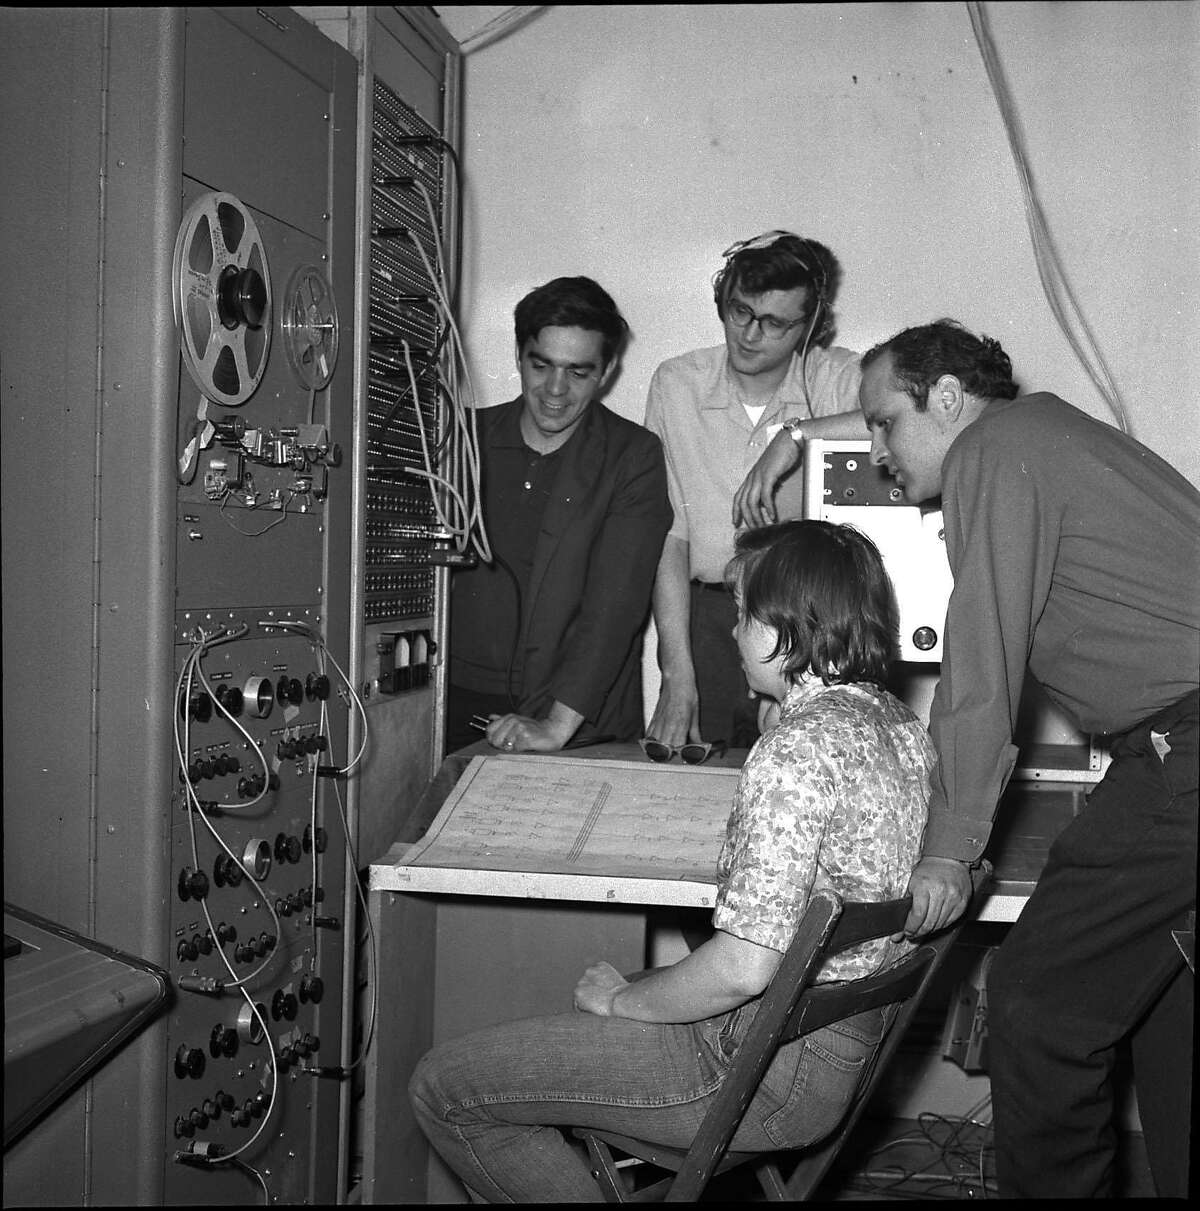 TAPEMUSIC-29MAR1964-AF - Ramon Sender, Mike Callahan, Morton Subotnick, Pauline Oliveros, at the San Francisco Tape Music Center, with all sorts of sound generators. Tape Center wants $1200 to transform itself from a local into and international institution. Photo by Art Frisch